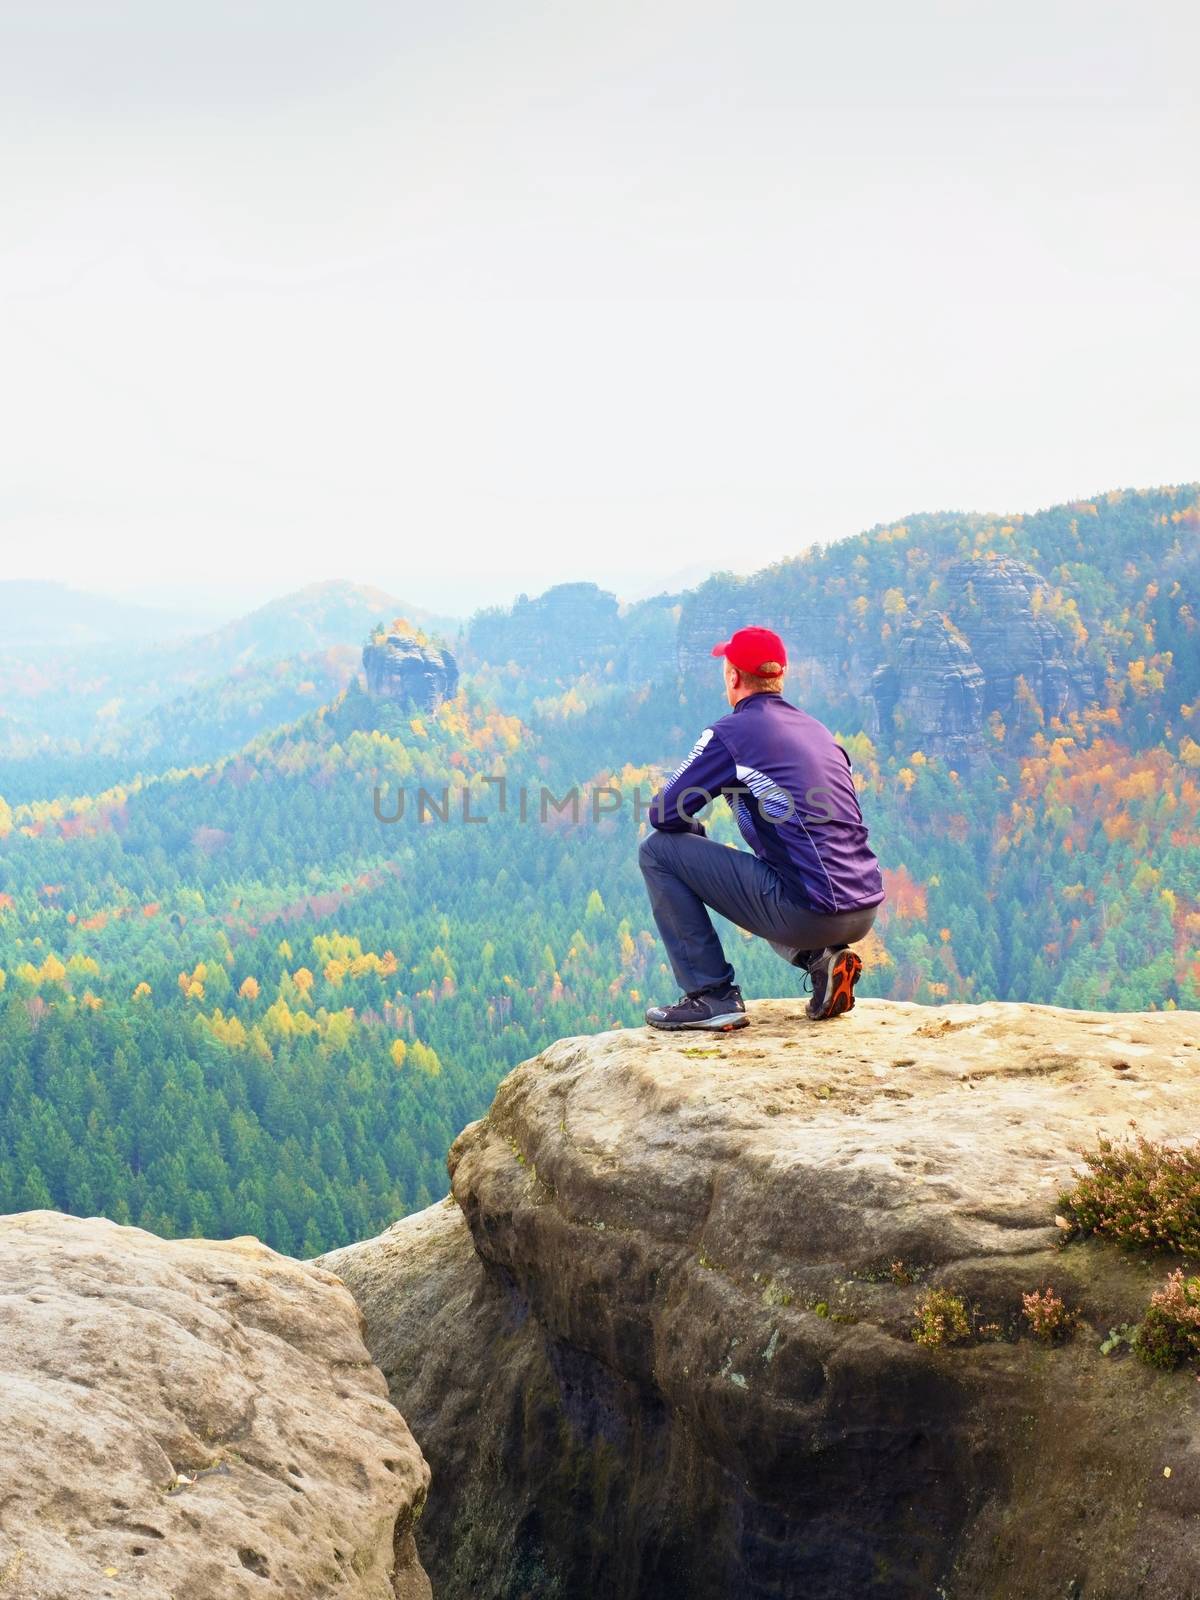 Moment of loneliness. Man in black enjoy marvelous view. Hiker sit on the peak of rock and watching into colorful mist and fog in forest valley.